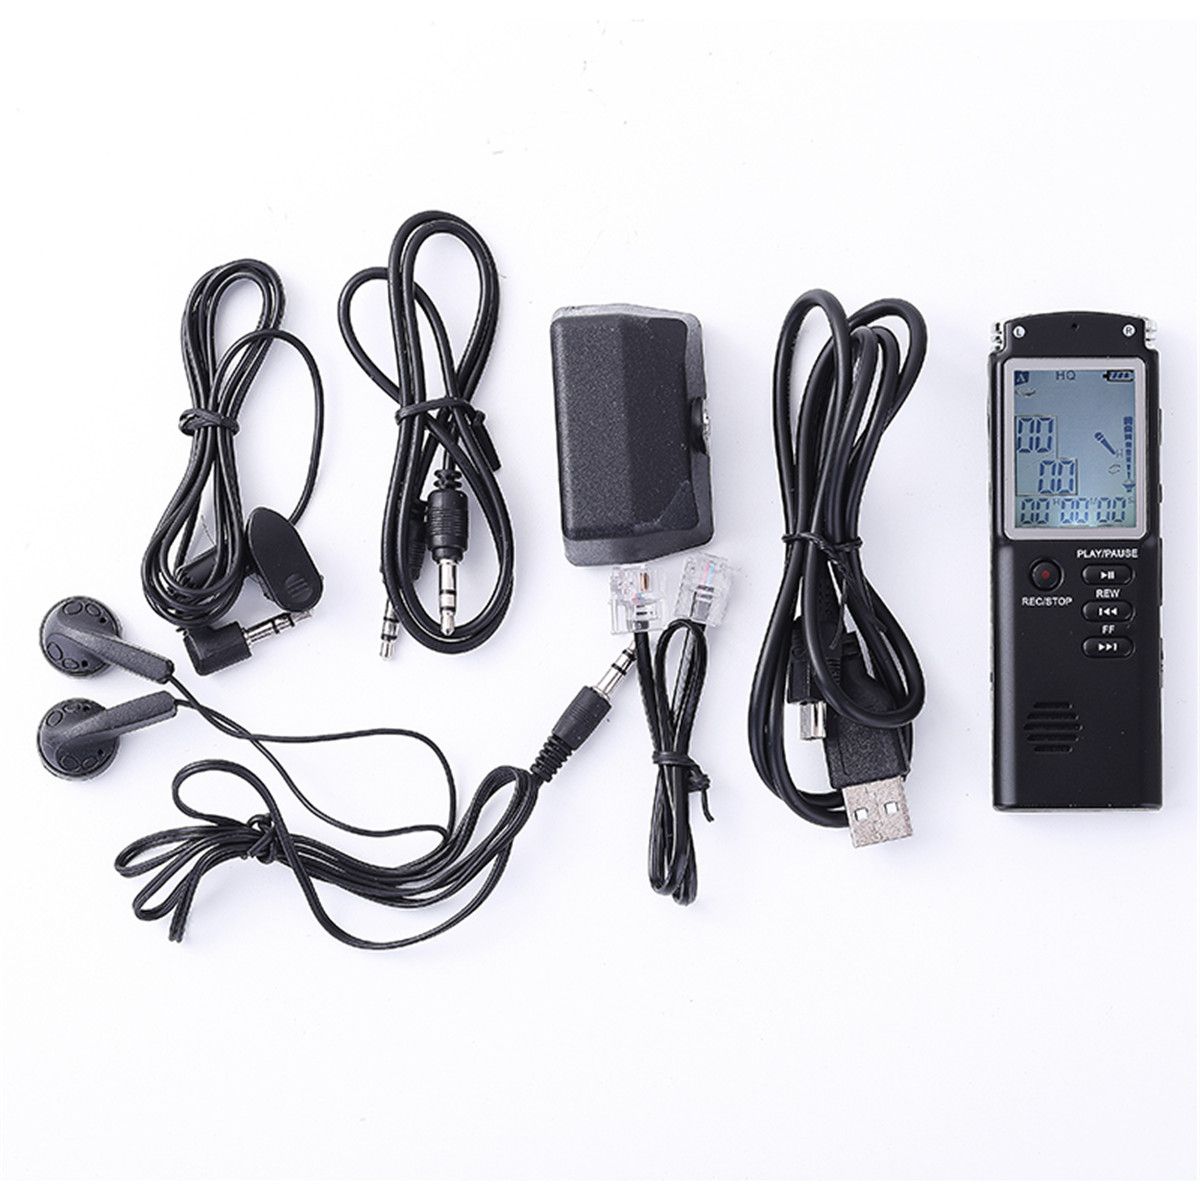 Digital-Voice-Recorder-81632GB-MP3-Lossless-Player-USB-Audio-Rechargeable-Mini-Dictaphone-1759537